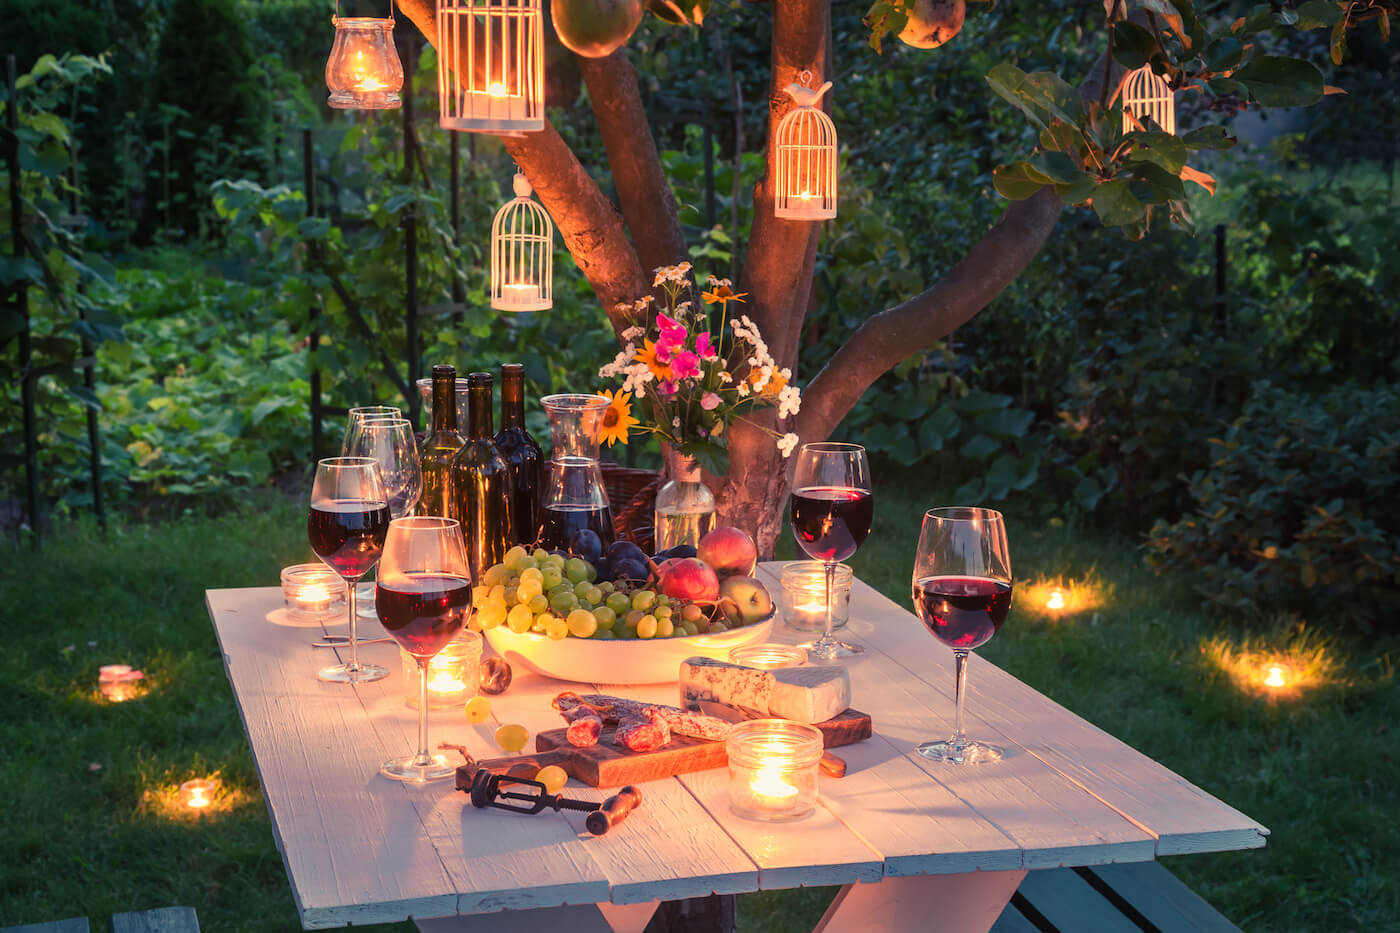 Tips To Enjoy A Romantic Outdoor Dinner, Outdoor Candlelight Dinner Ideas